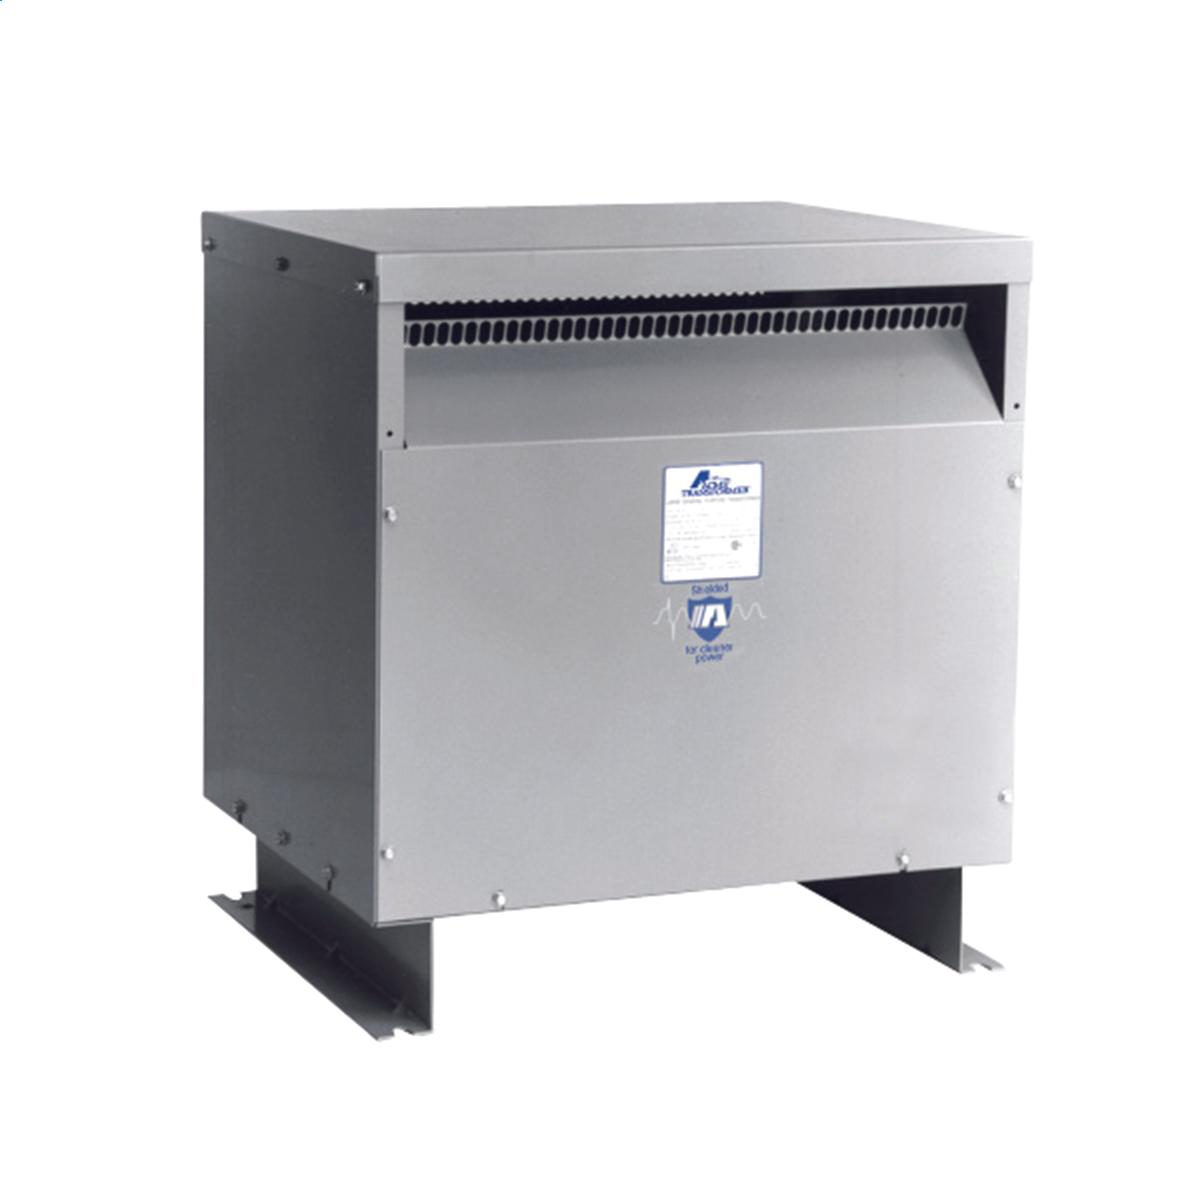 Hubbell WI045K23 Medium Voltage Transformer - Three Phase, 4800Δ - 240ΔV, 45kVA  ; Lower operating cost over Liquid-filled ; No additional fireproofing or venting ; Long life expectancy ; Smaller, lighter easy to maintain